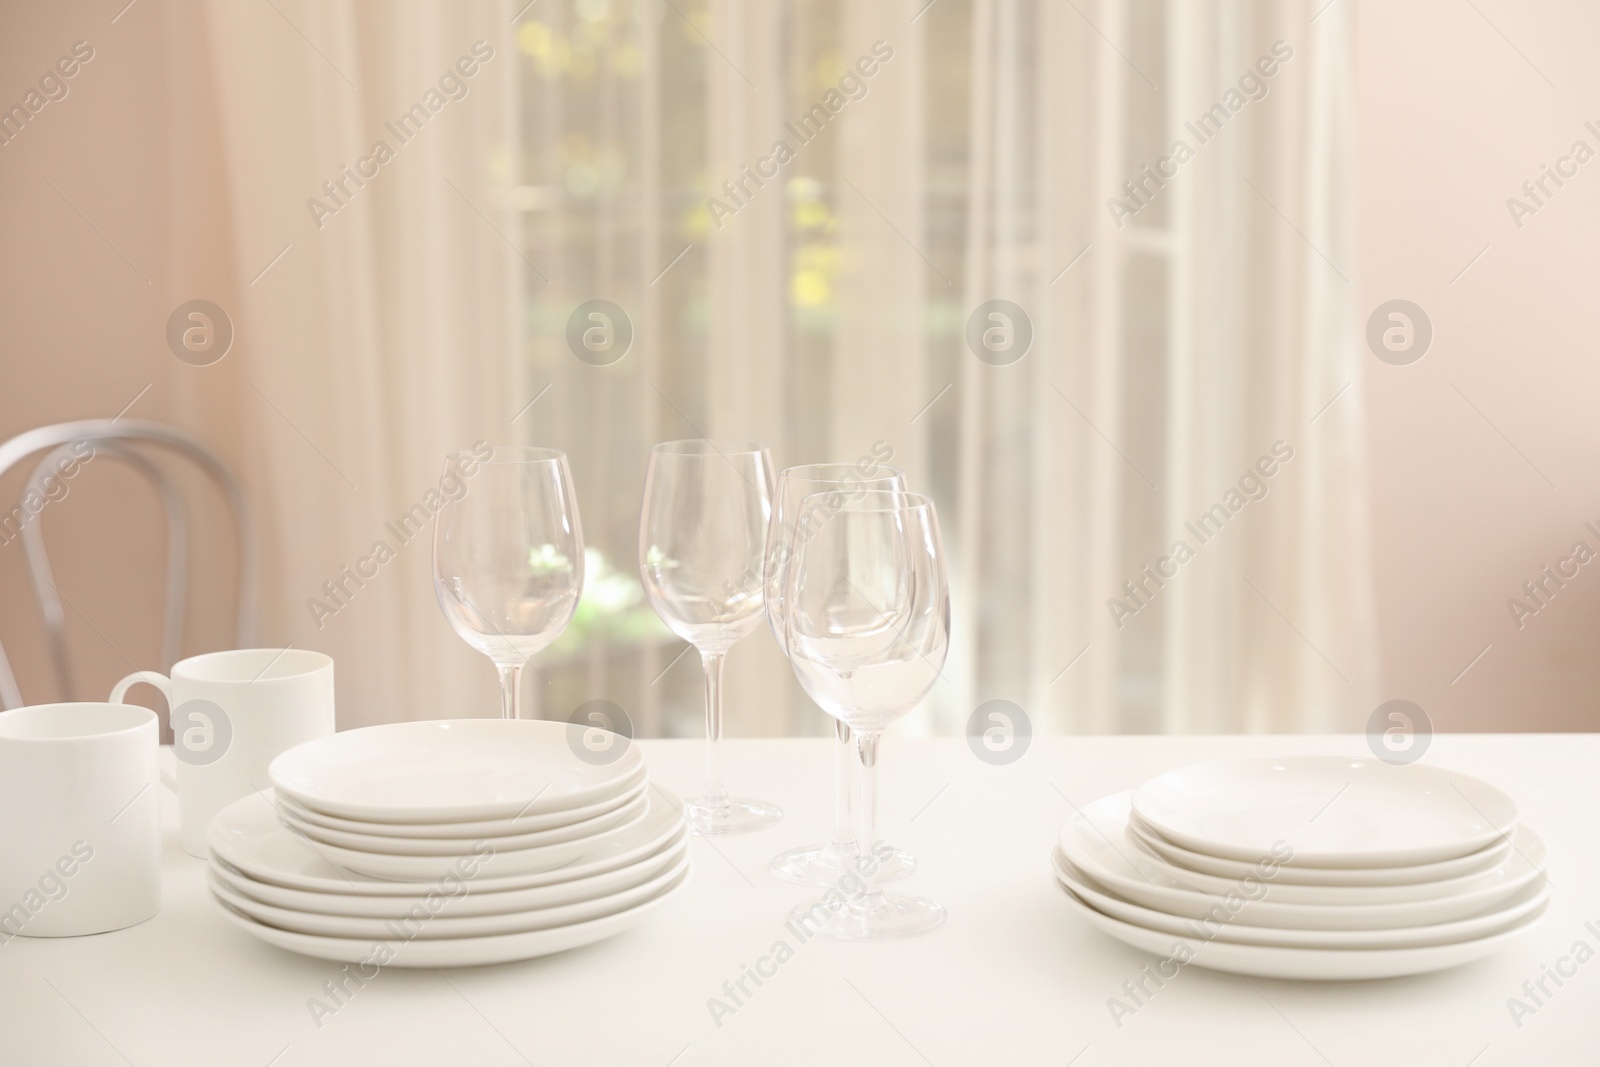 Photo of Stack of clean dishes, glasses and cups on table in kitchen